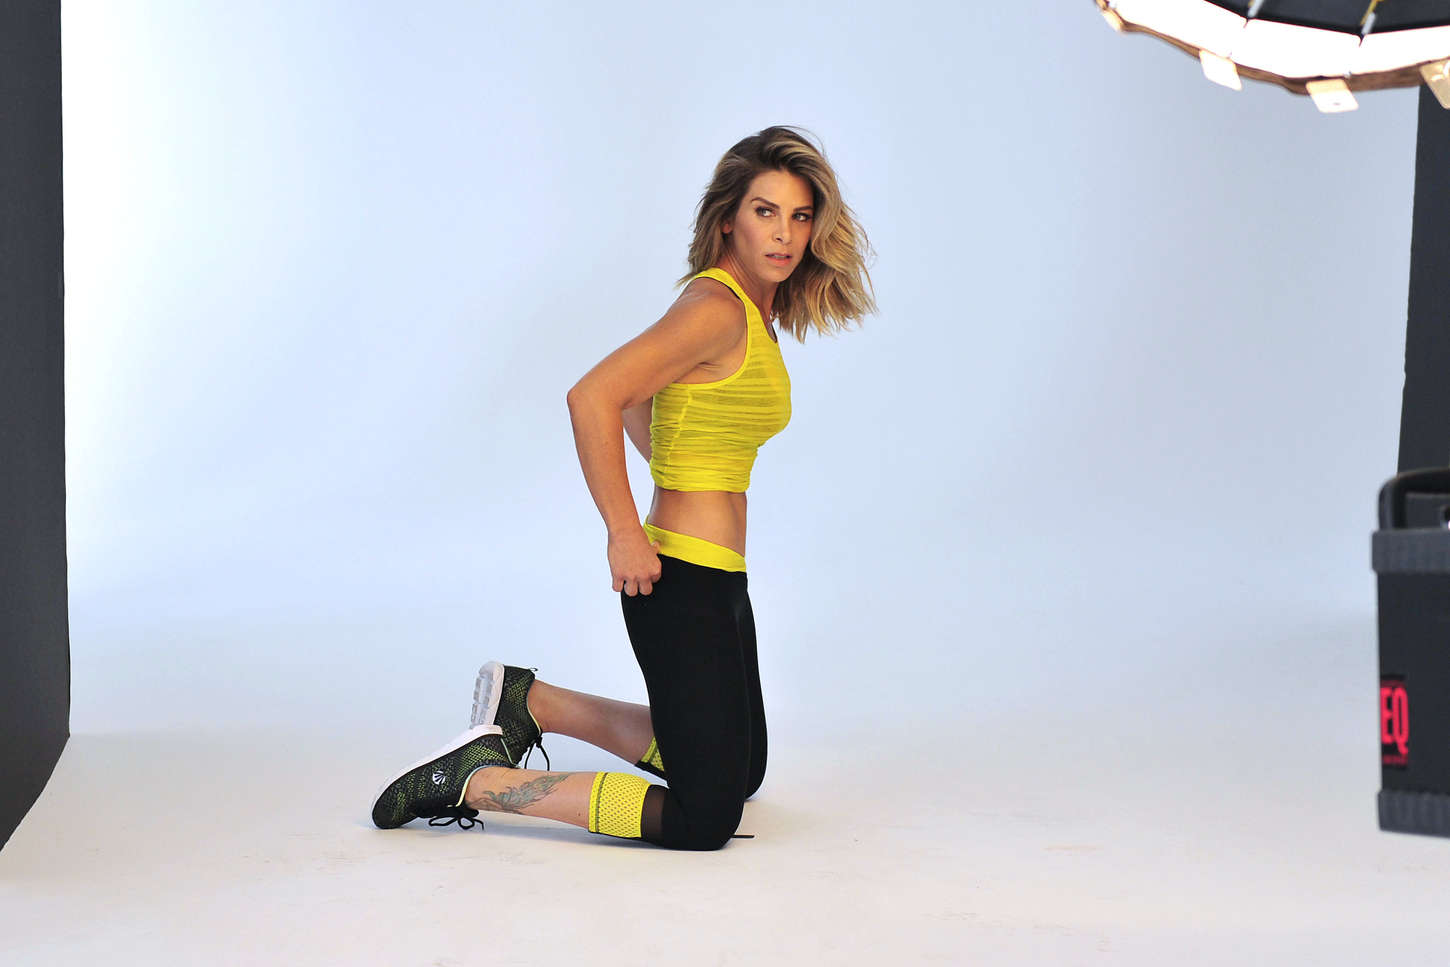 Jillian Michaels Impact Collection For Kmart Fall Campaign Shoot in Los Angeles